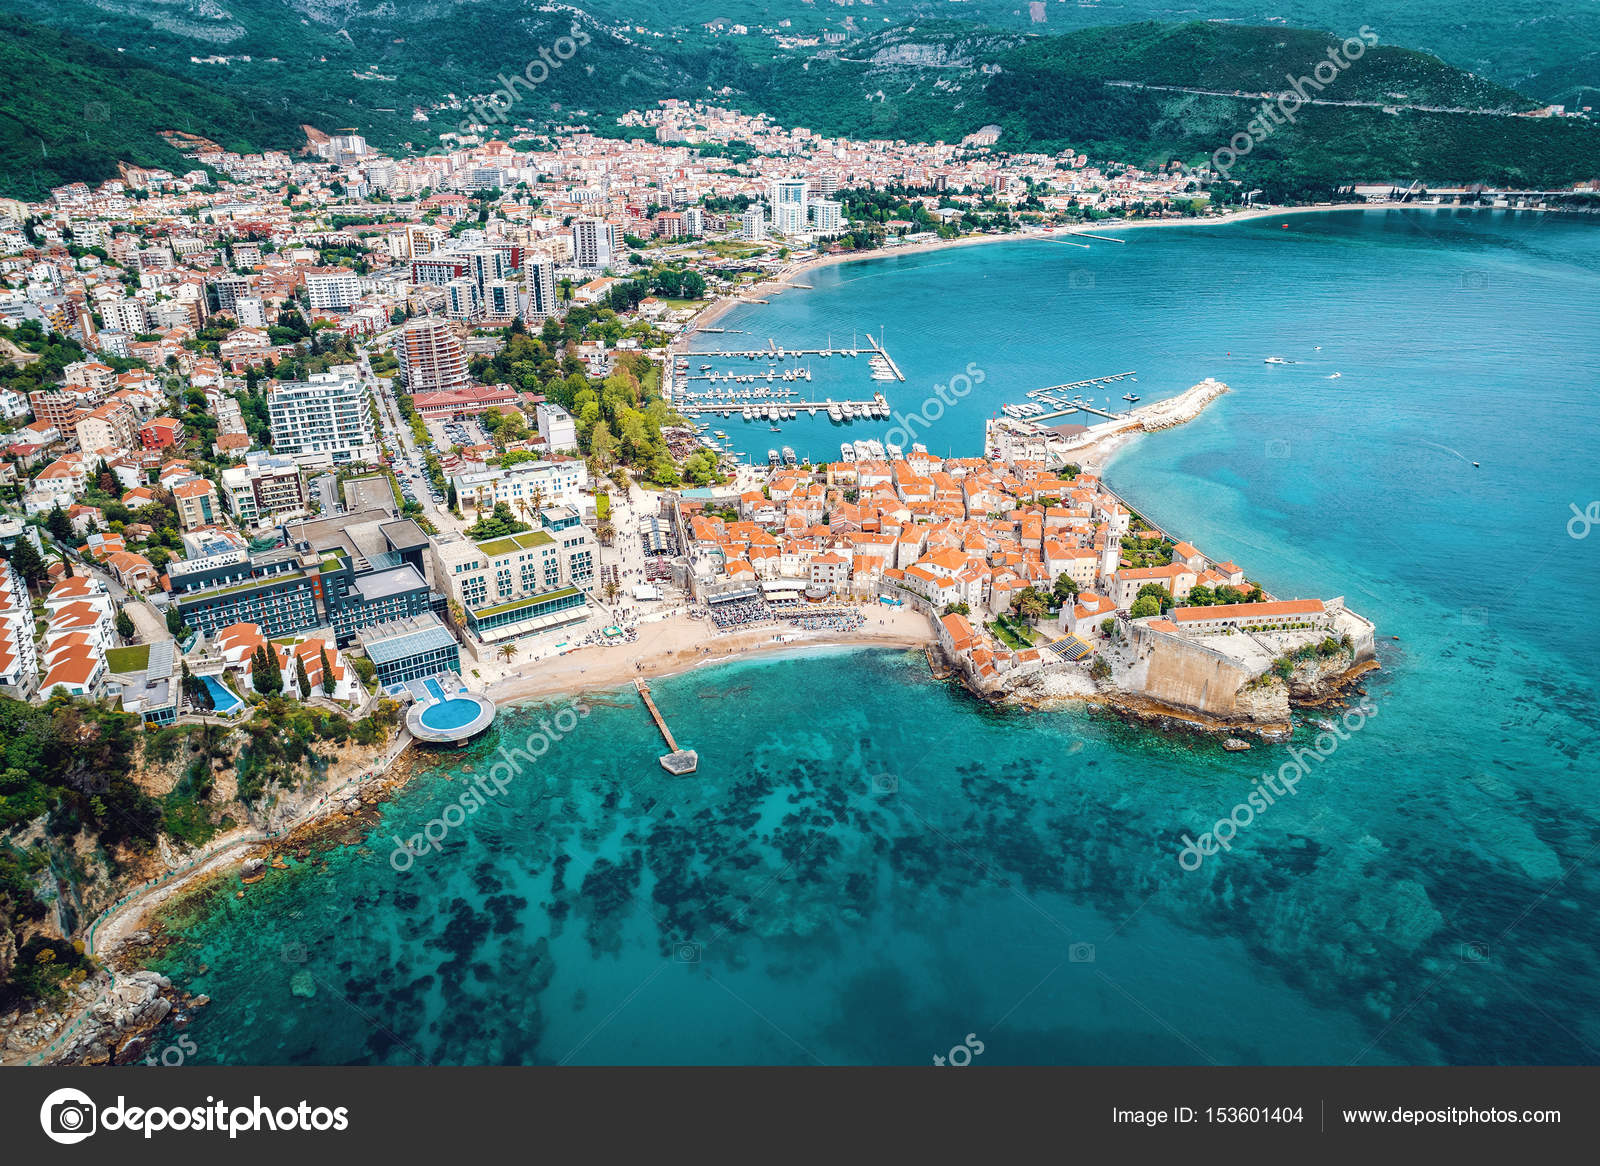 Budva Montenegro Aerial View Royalty Free Photo Stock Image By C Ozimicians 153601404